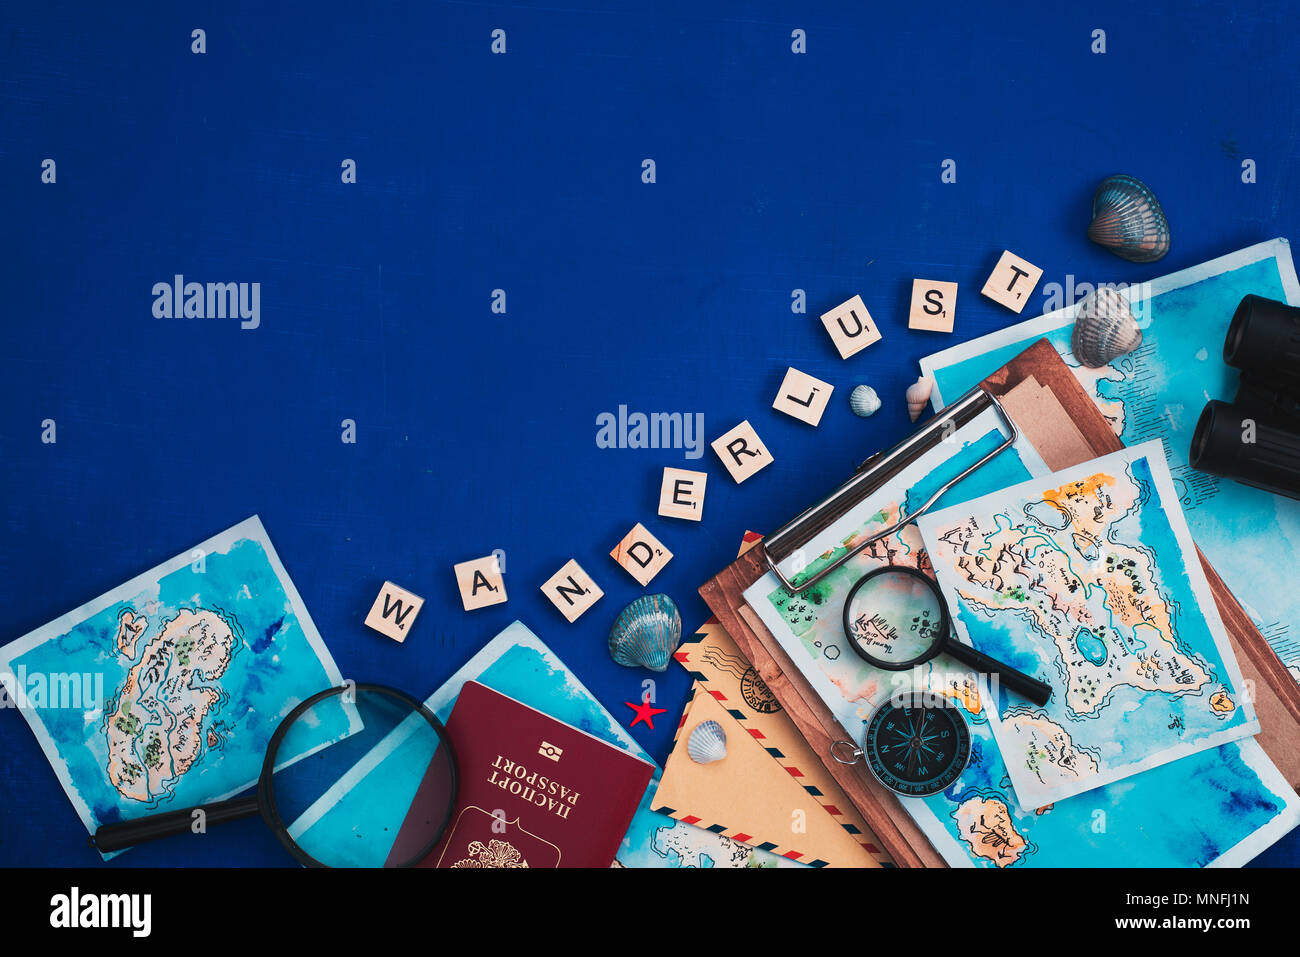 Header with travel and exploration concept. Watercolor maps, passport, compass, binoculars, envelopes, magnifying glass, and Wanderlust wooden letters Stock Photo